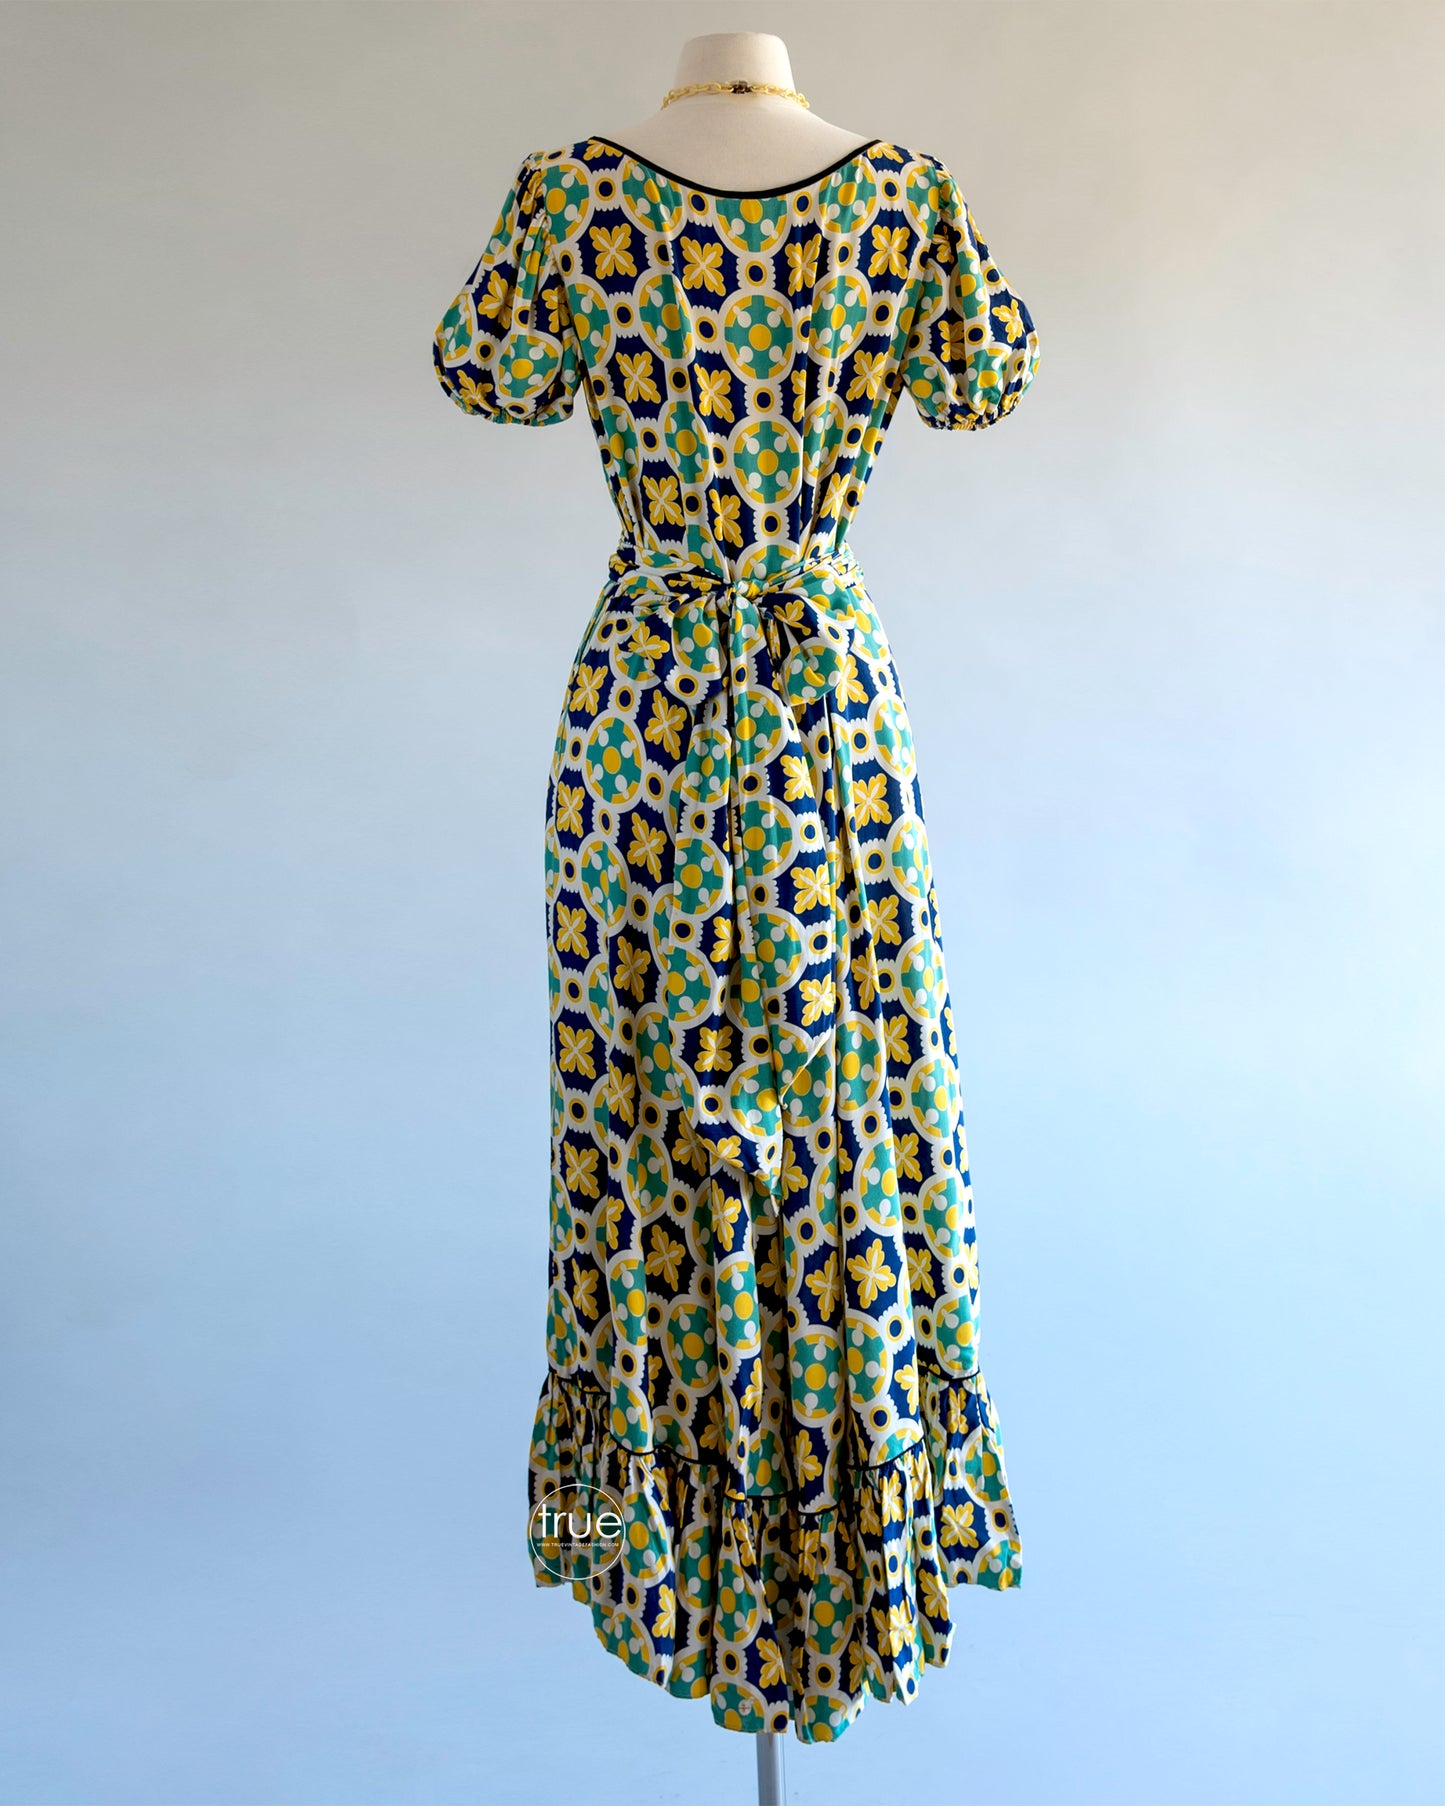 vintage 1930’s - early 1940’s dress ...Dale Hunter of California midi dress with a fun rounded and flounced hem